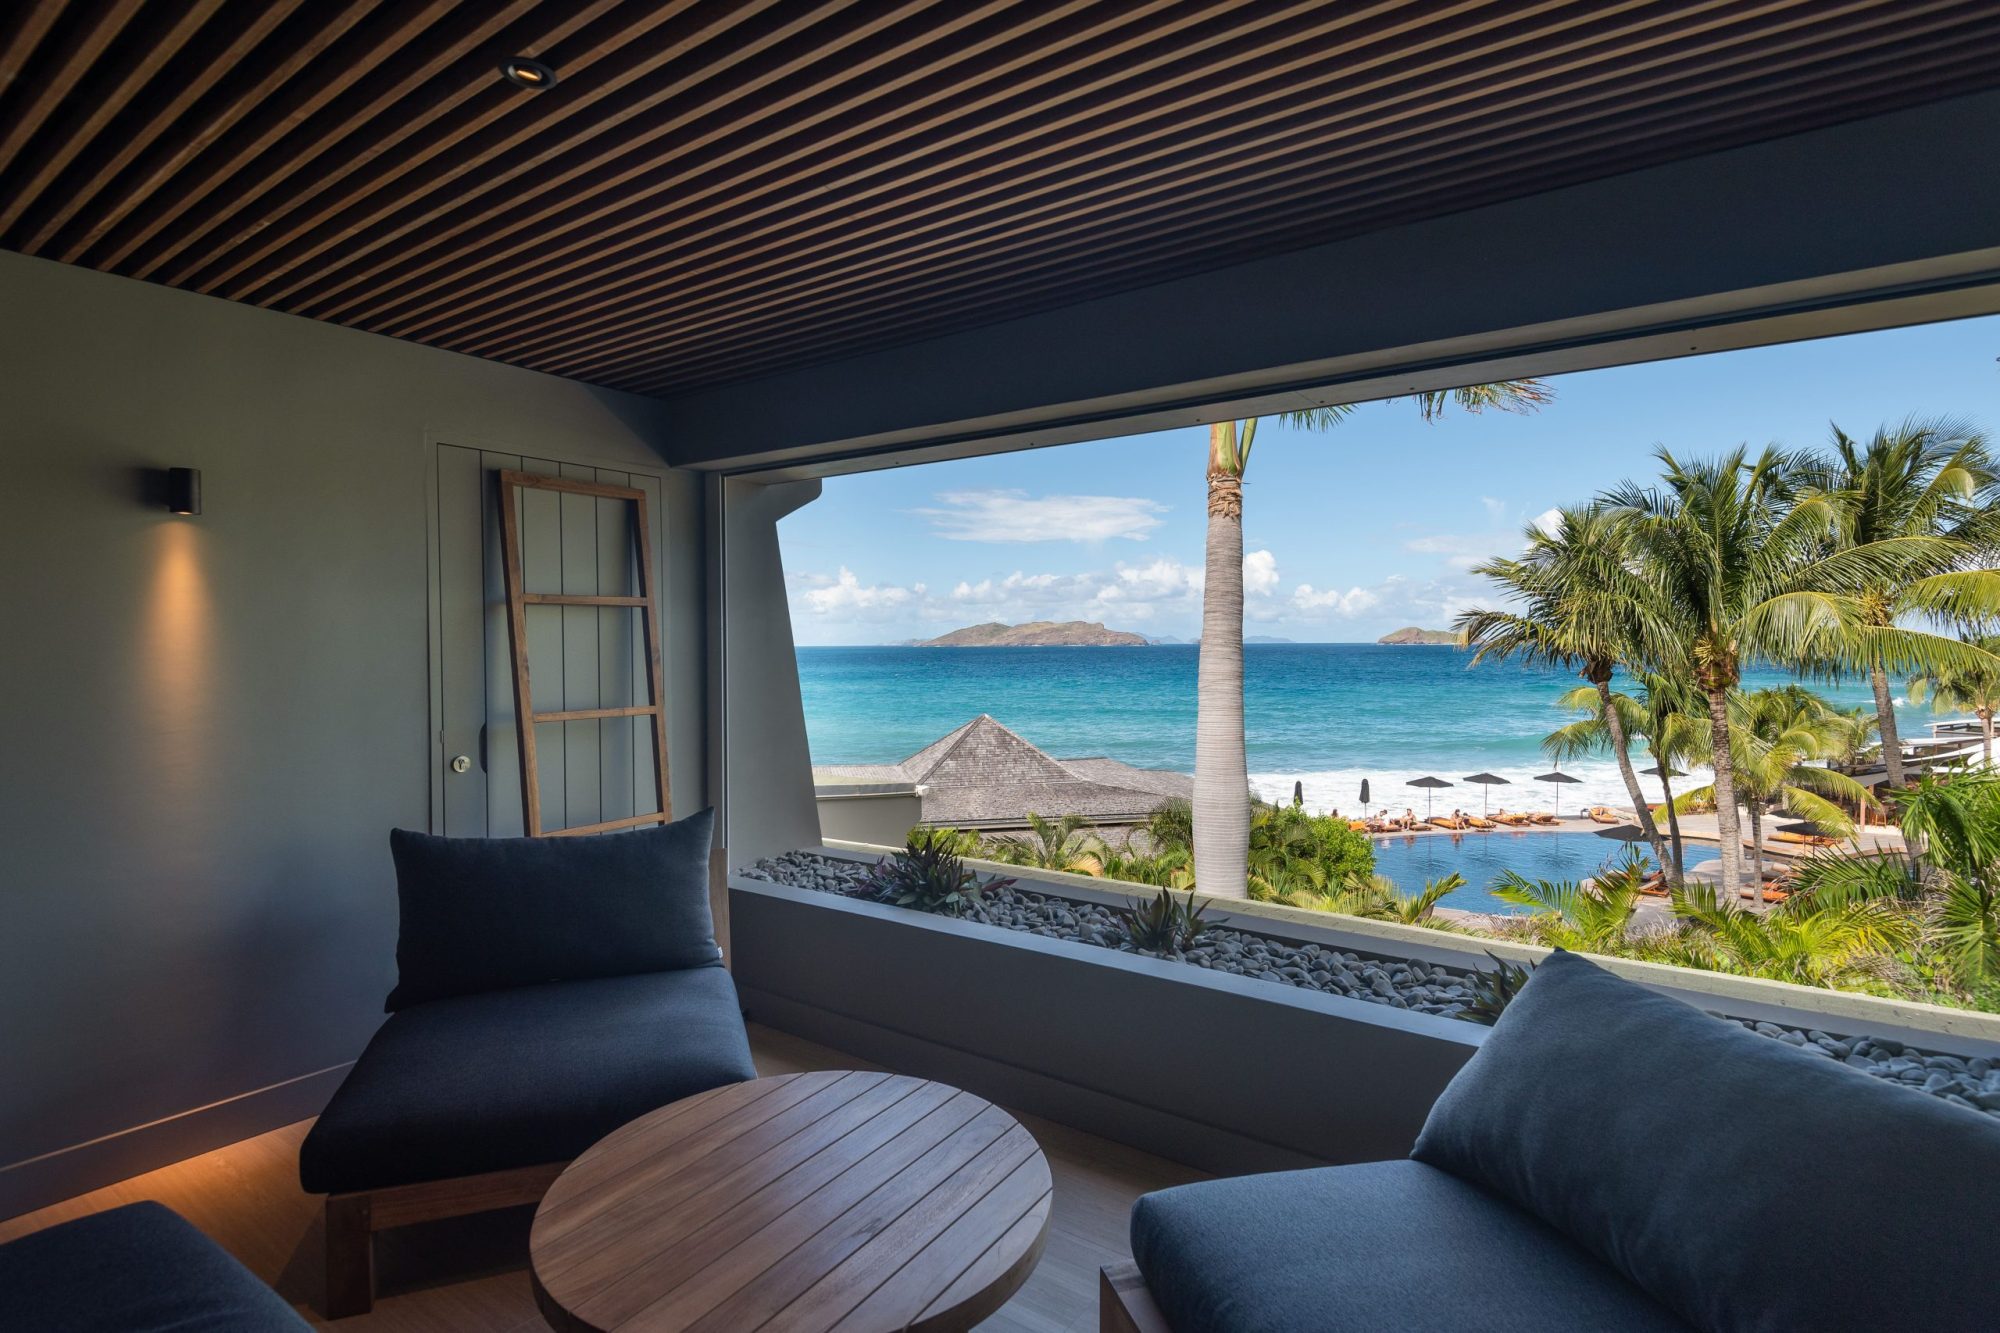 Hotel Christopher St Barth offers an intimate Caribbean retreat with stunning ocean views